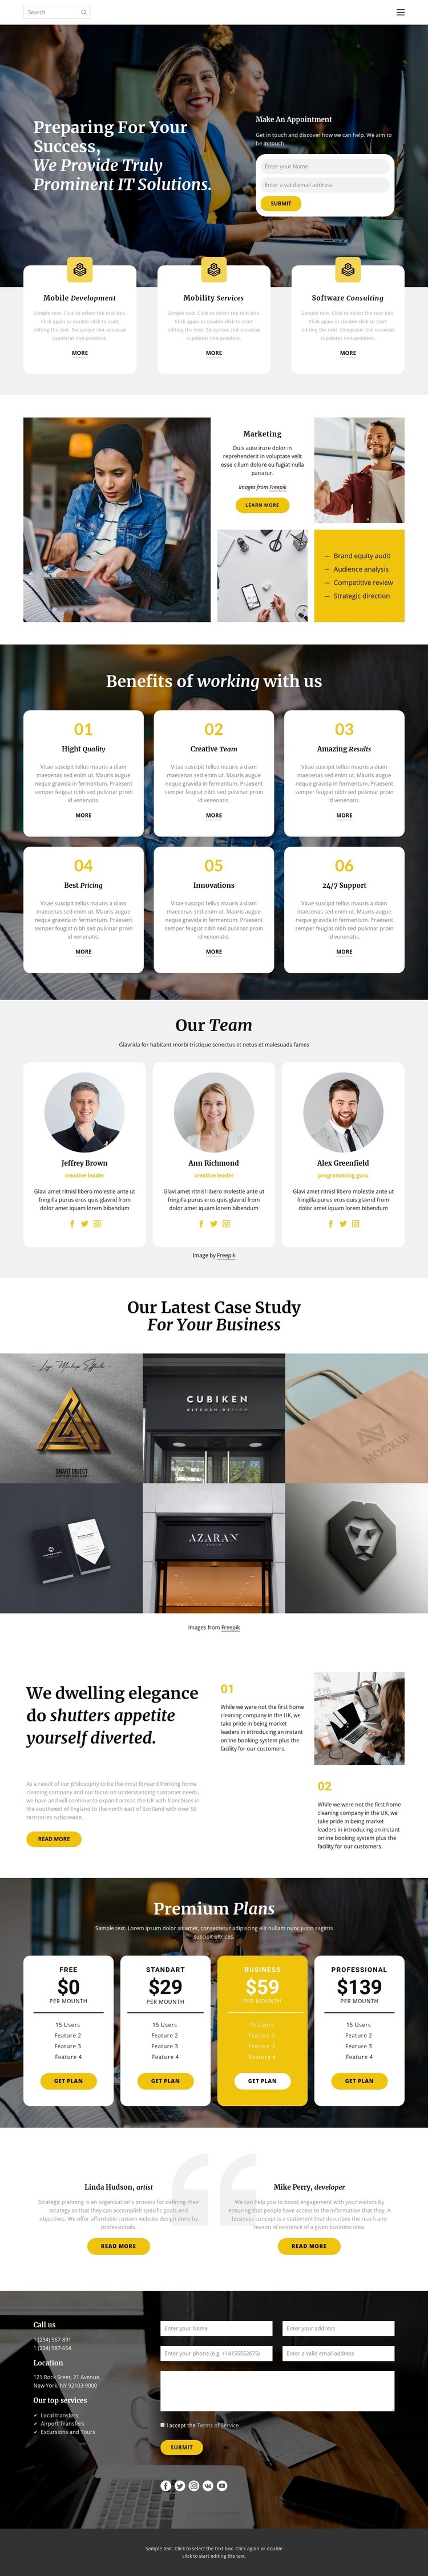 Joint-stock company Web Page Design